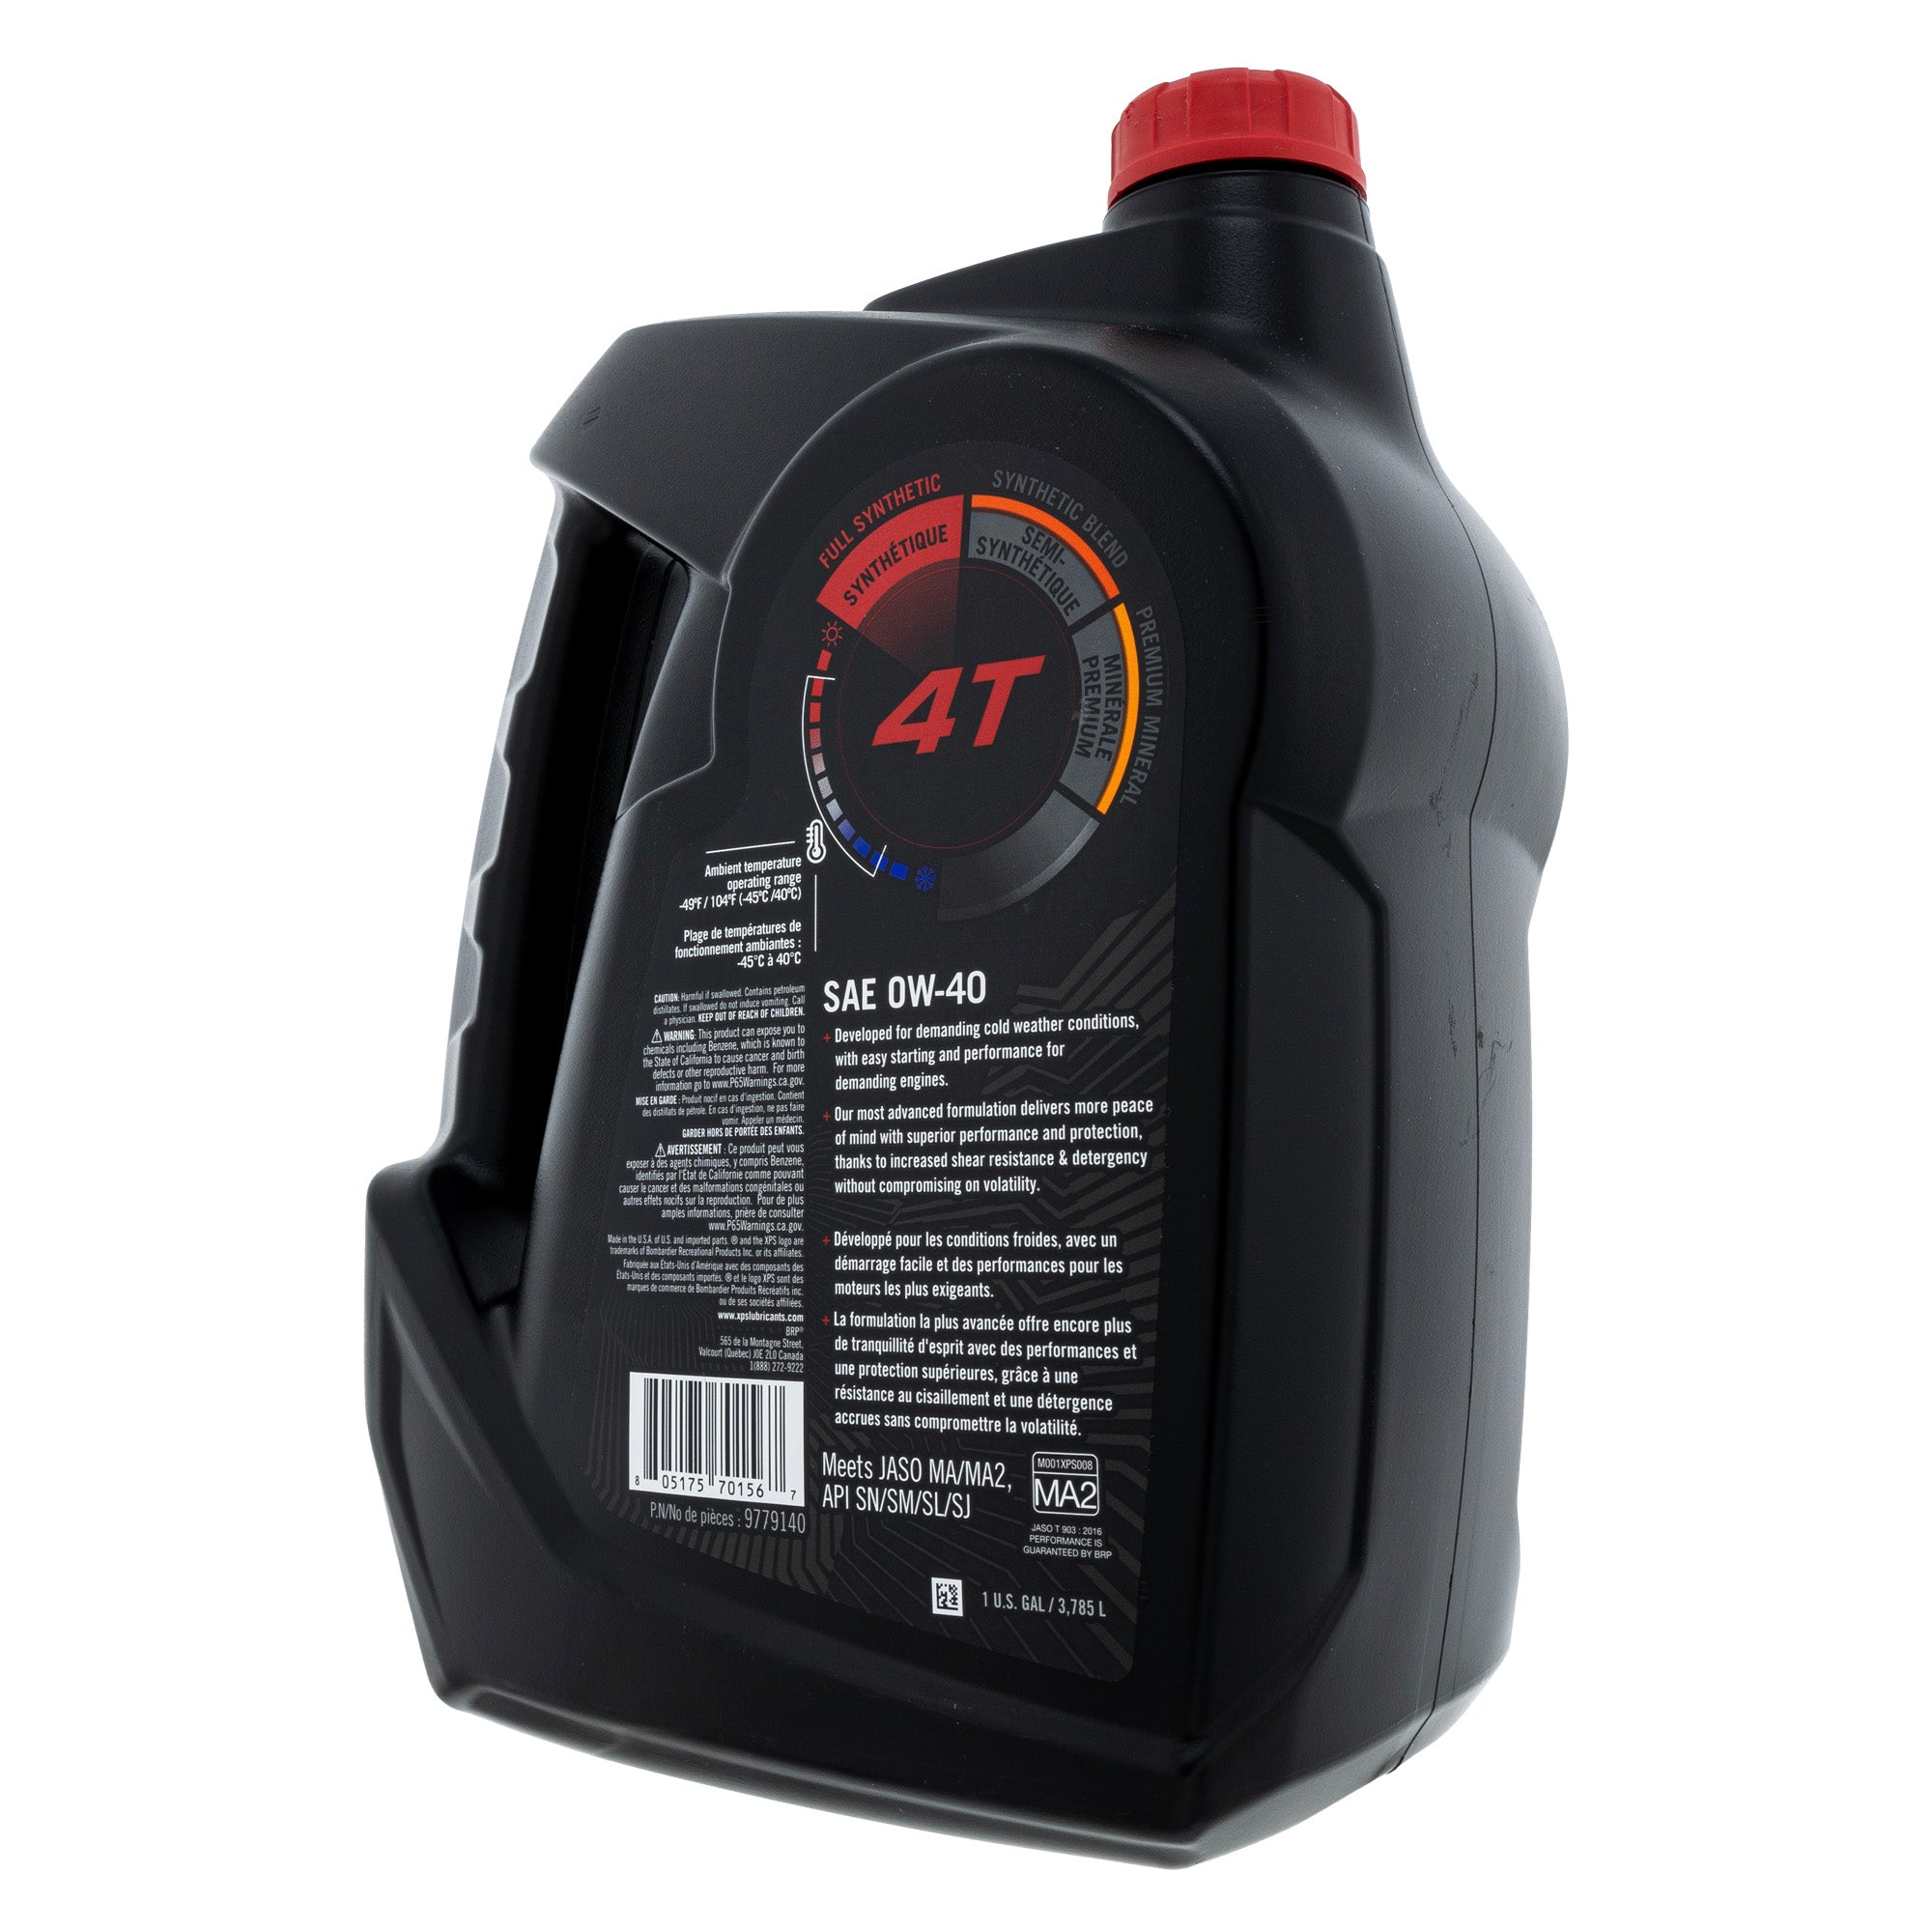 BRP 9779140 Can-Am 1 Gallon XPS 4-Stroke 0W-40 Full Synthetic Engine Oil Ski-Doo